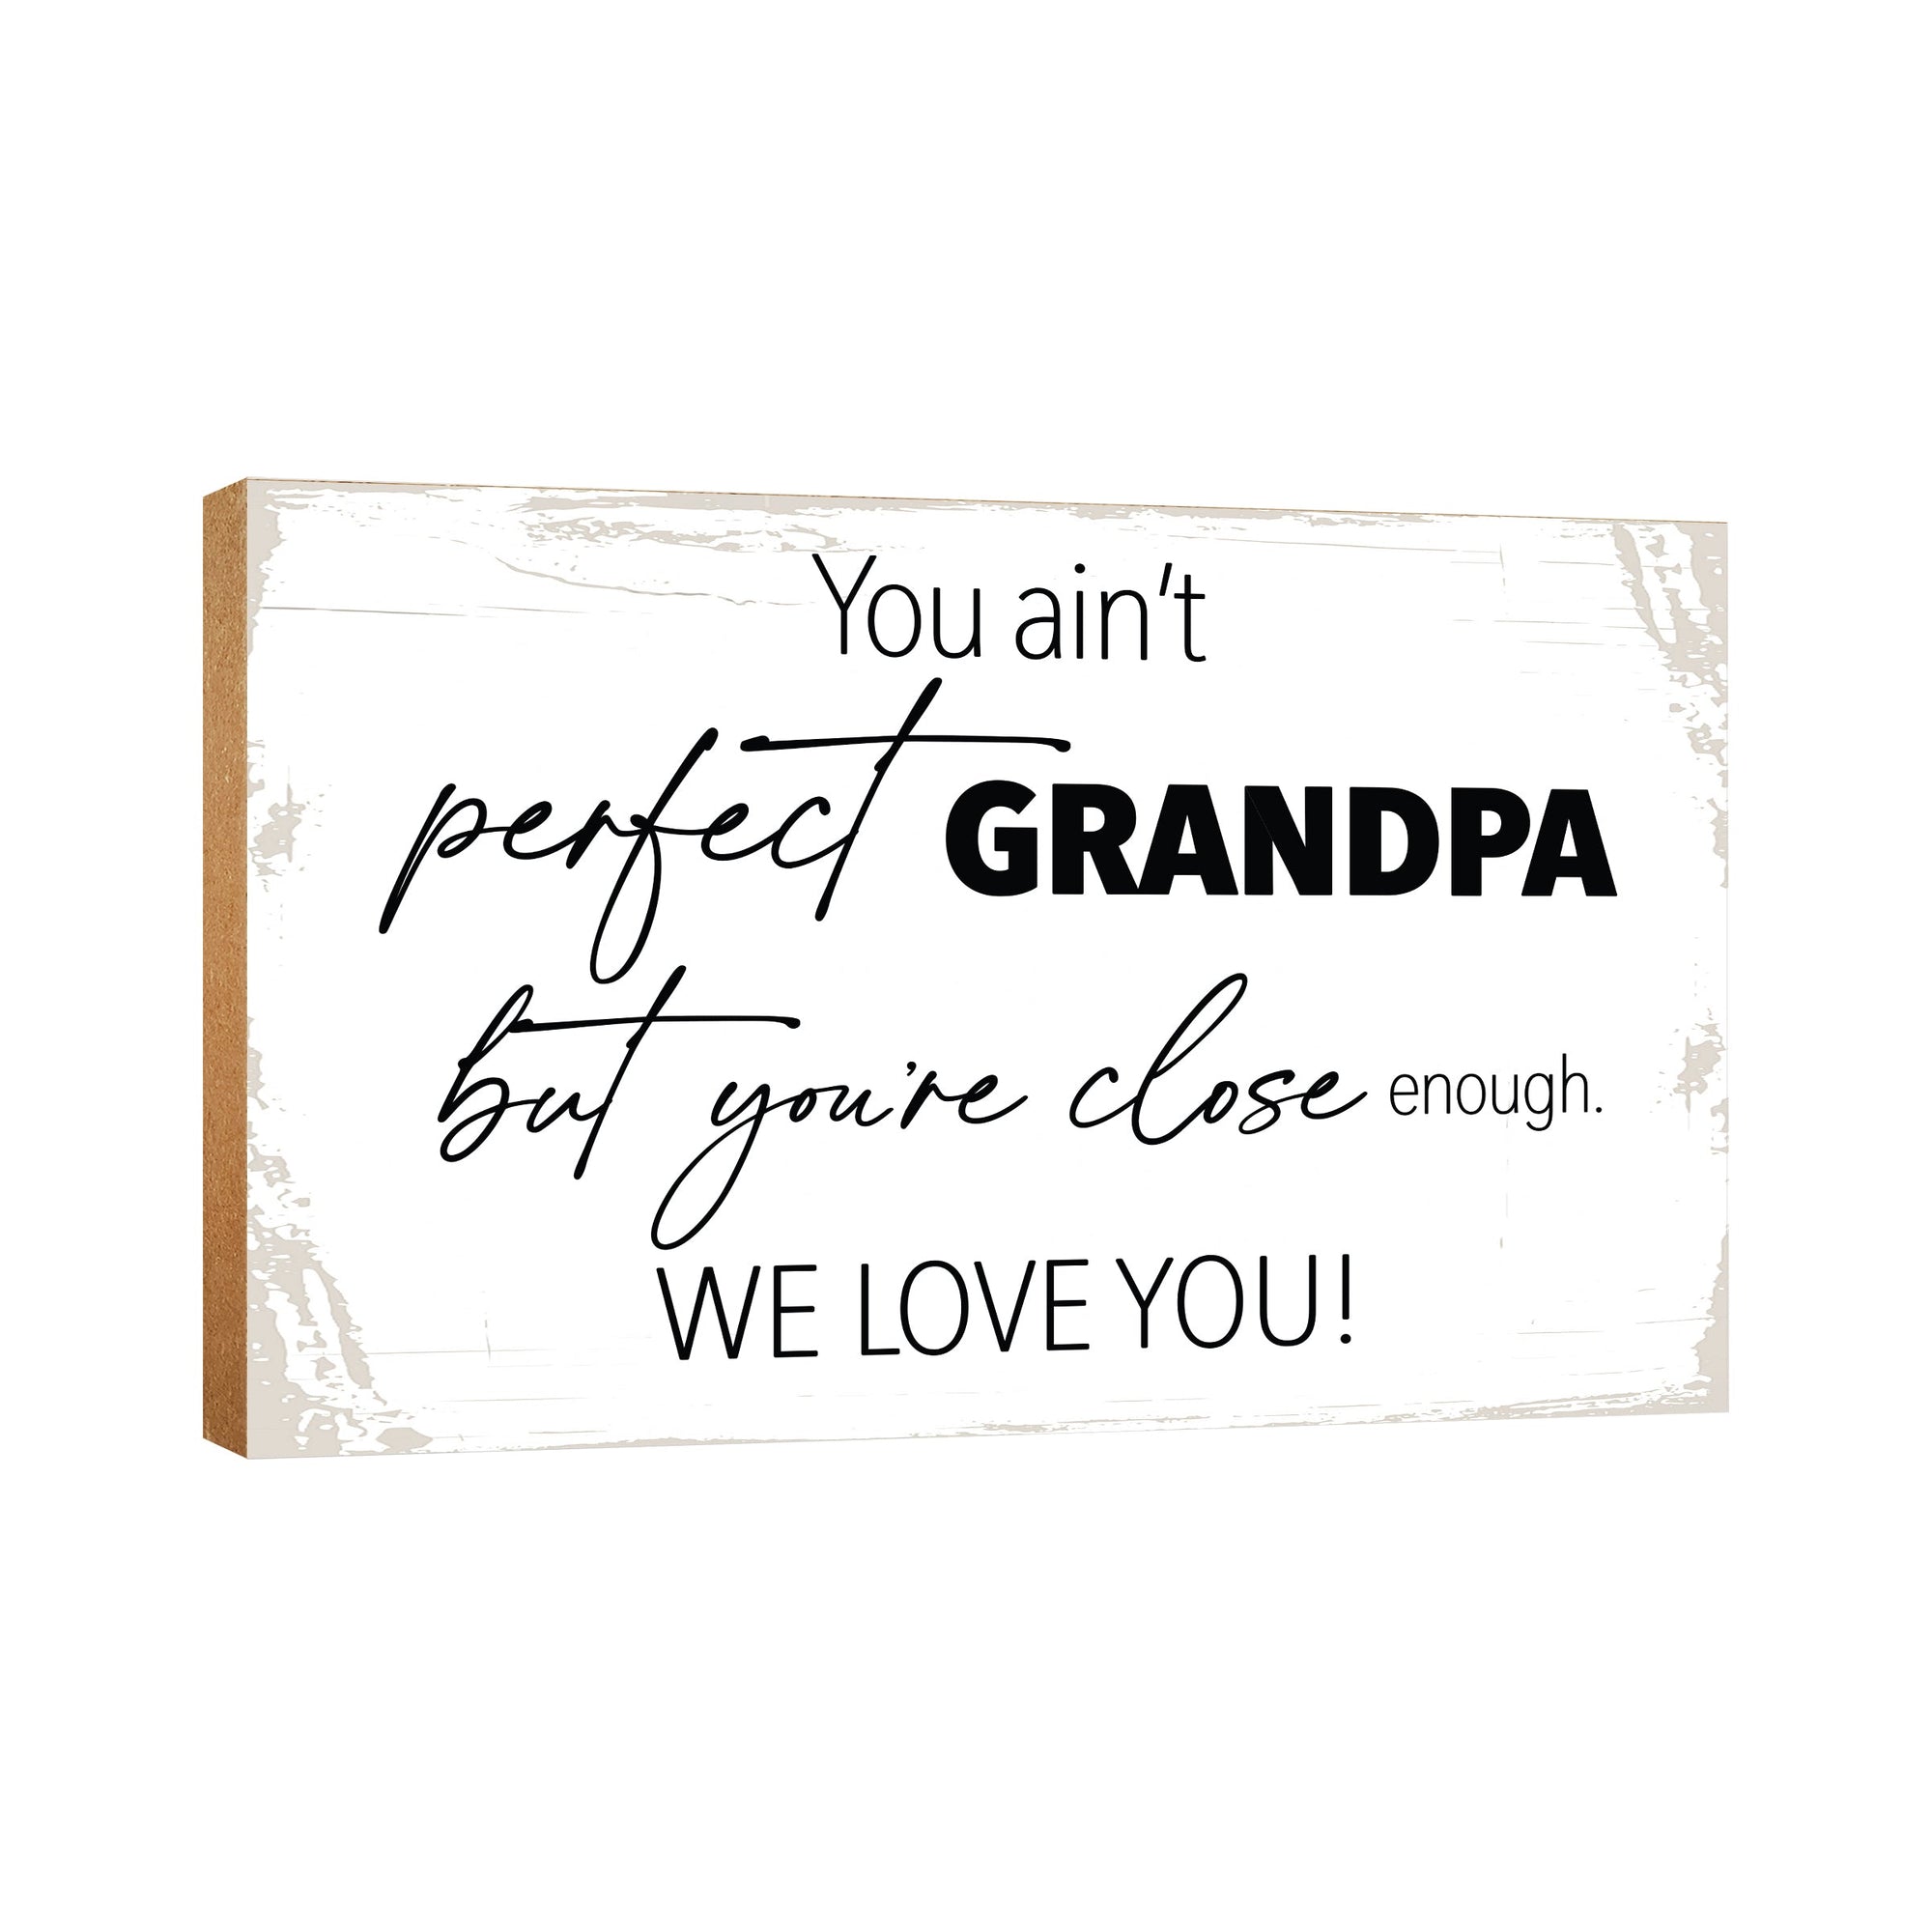 Table top décor for your grandfather's space, a beautiful home decoration.